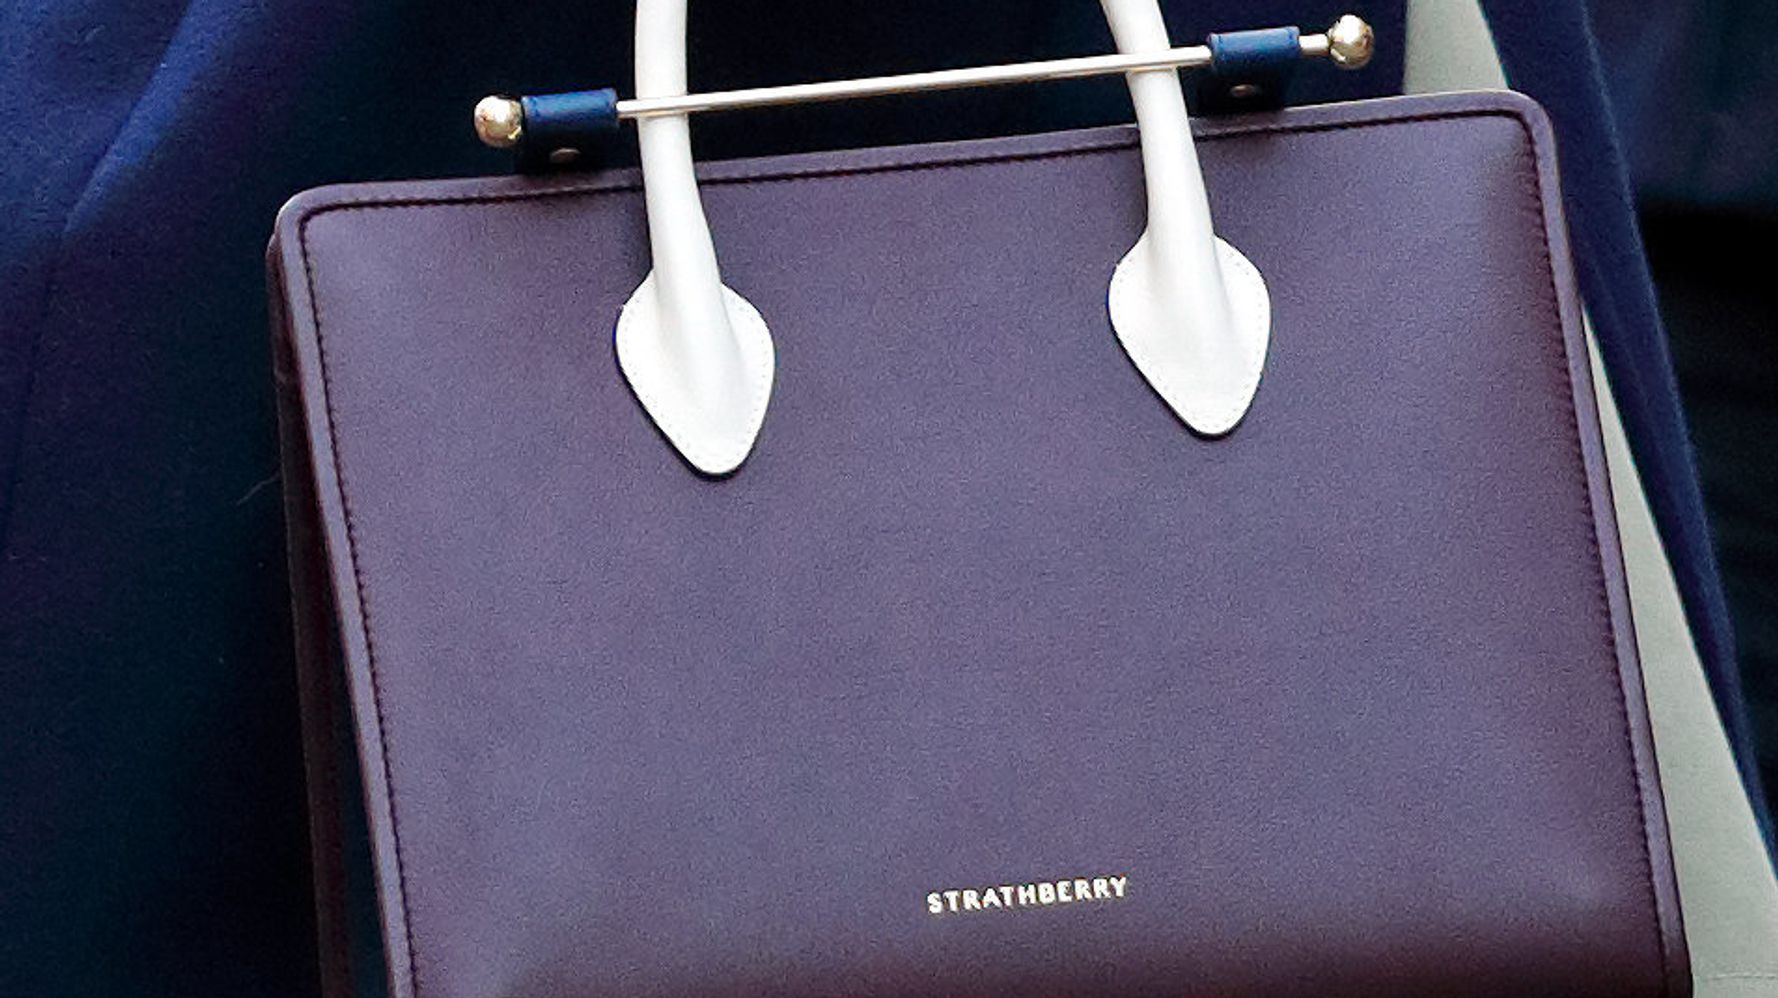 Strathberry - The making of the Meghan Markle bag 